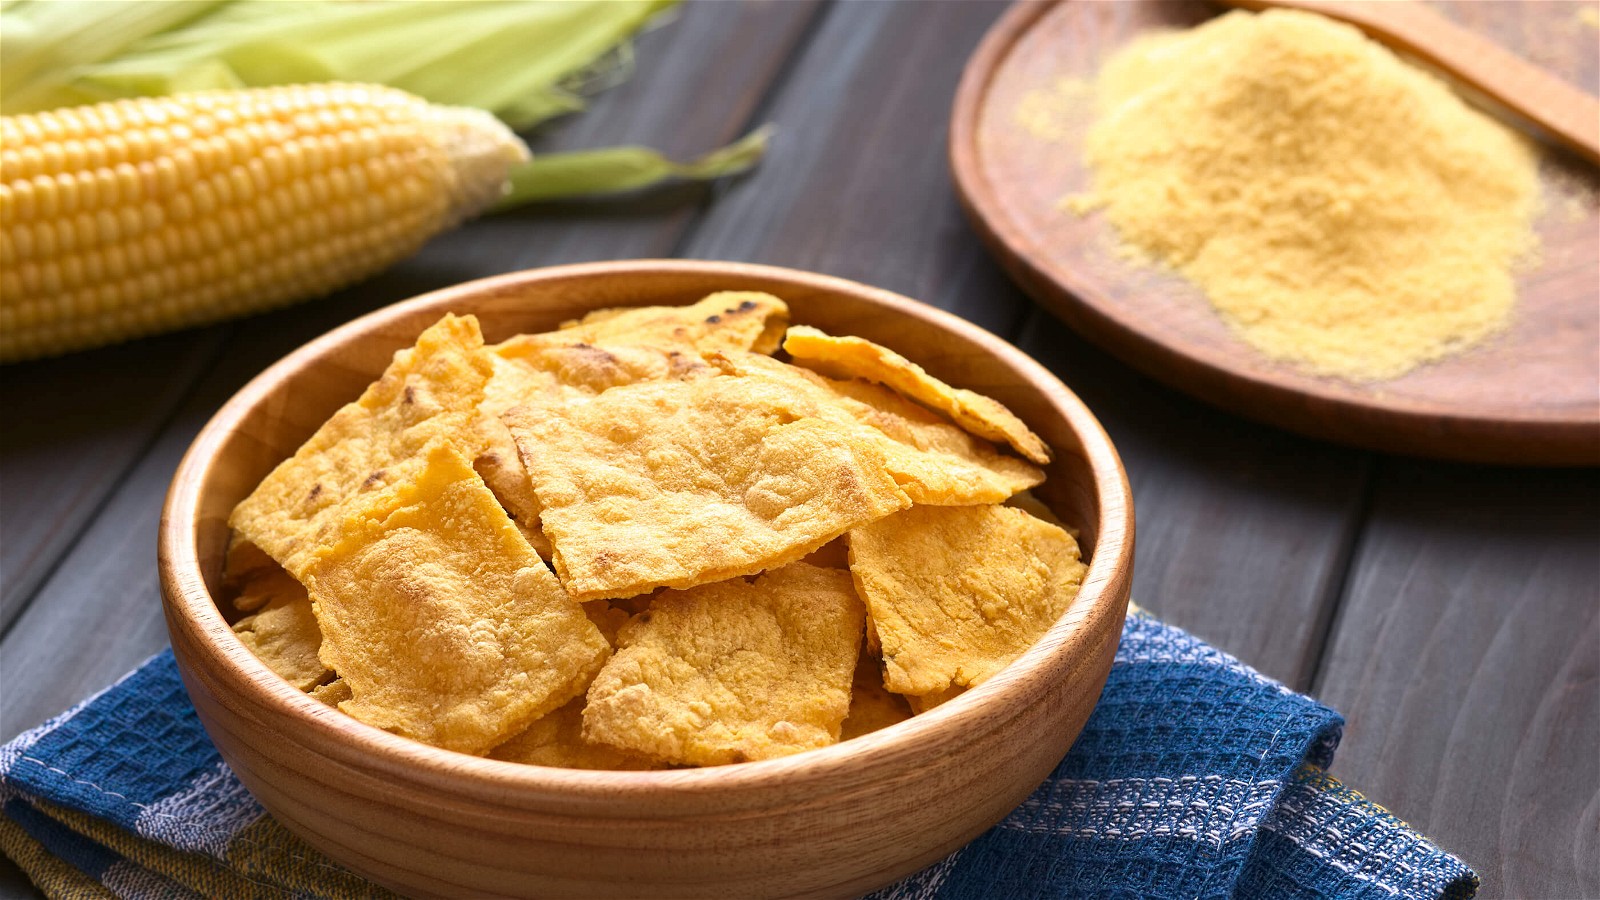 Image of Chili Lime Tortilla Chips